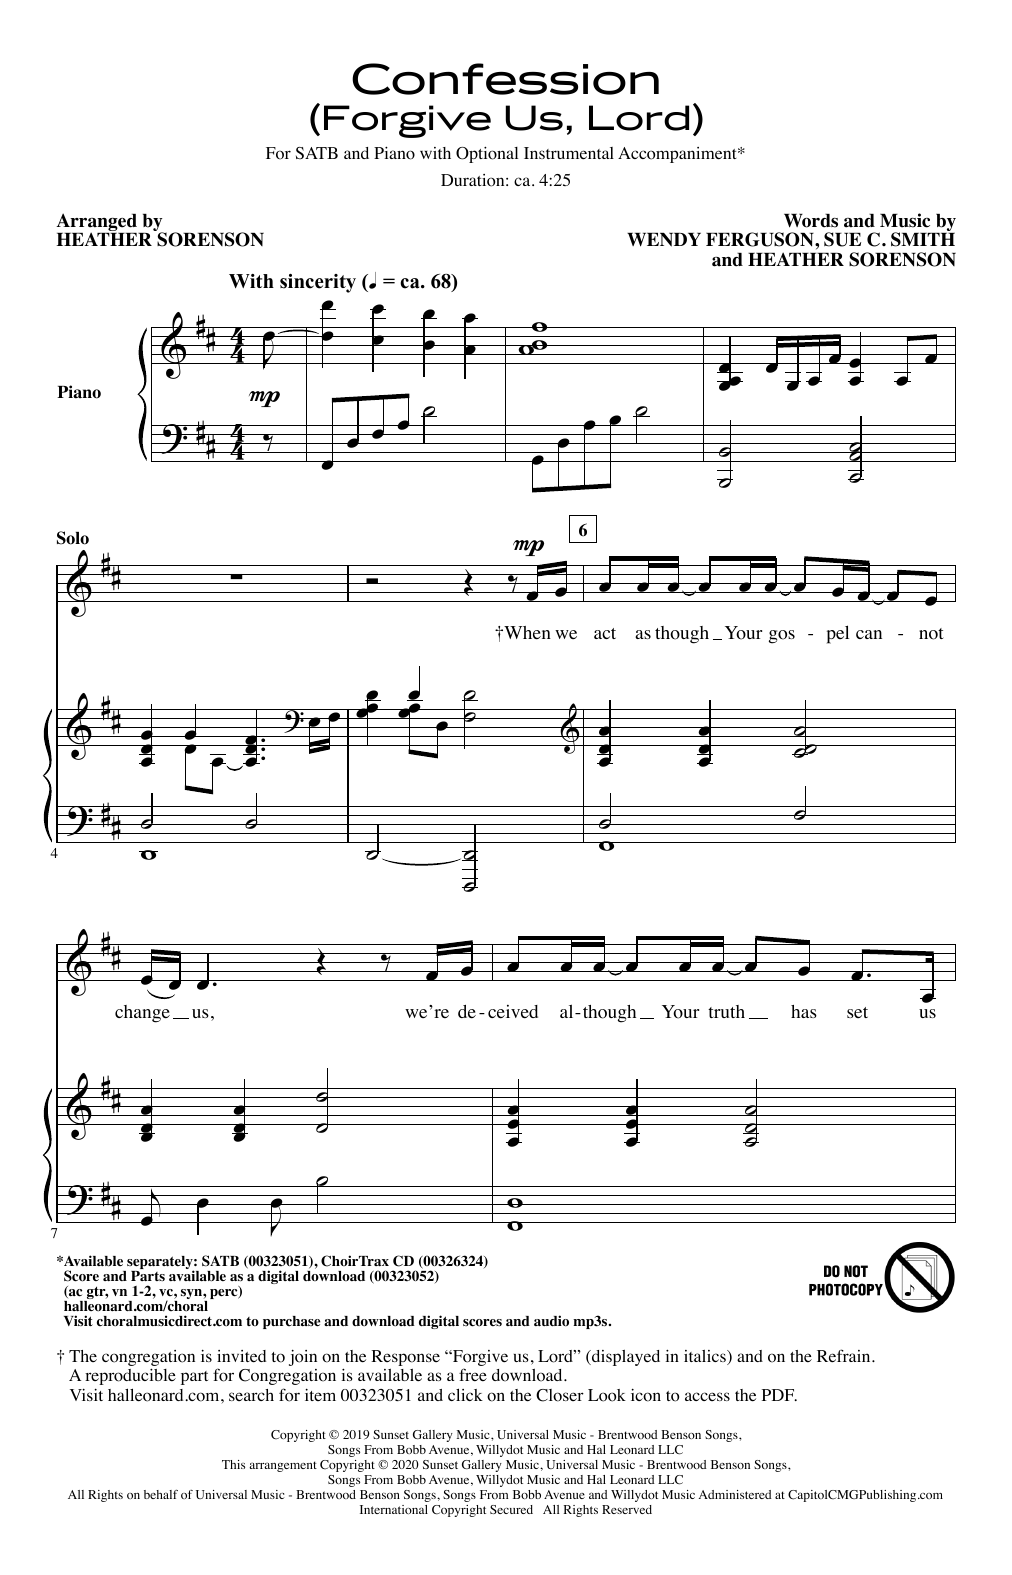 Download Wendy Ferguson, Sue C. Smith and Hea Confession (Forgive Us, Lord) (arr. Hea Sheet Music